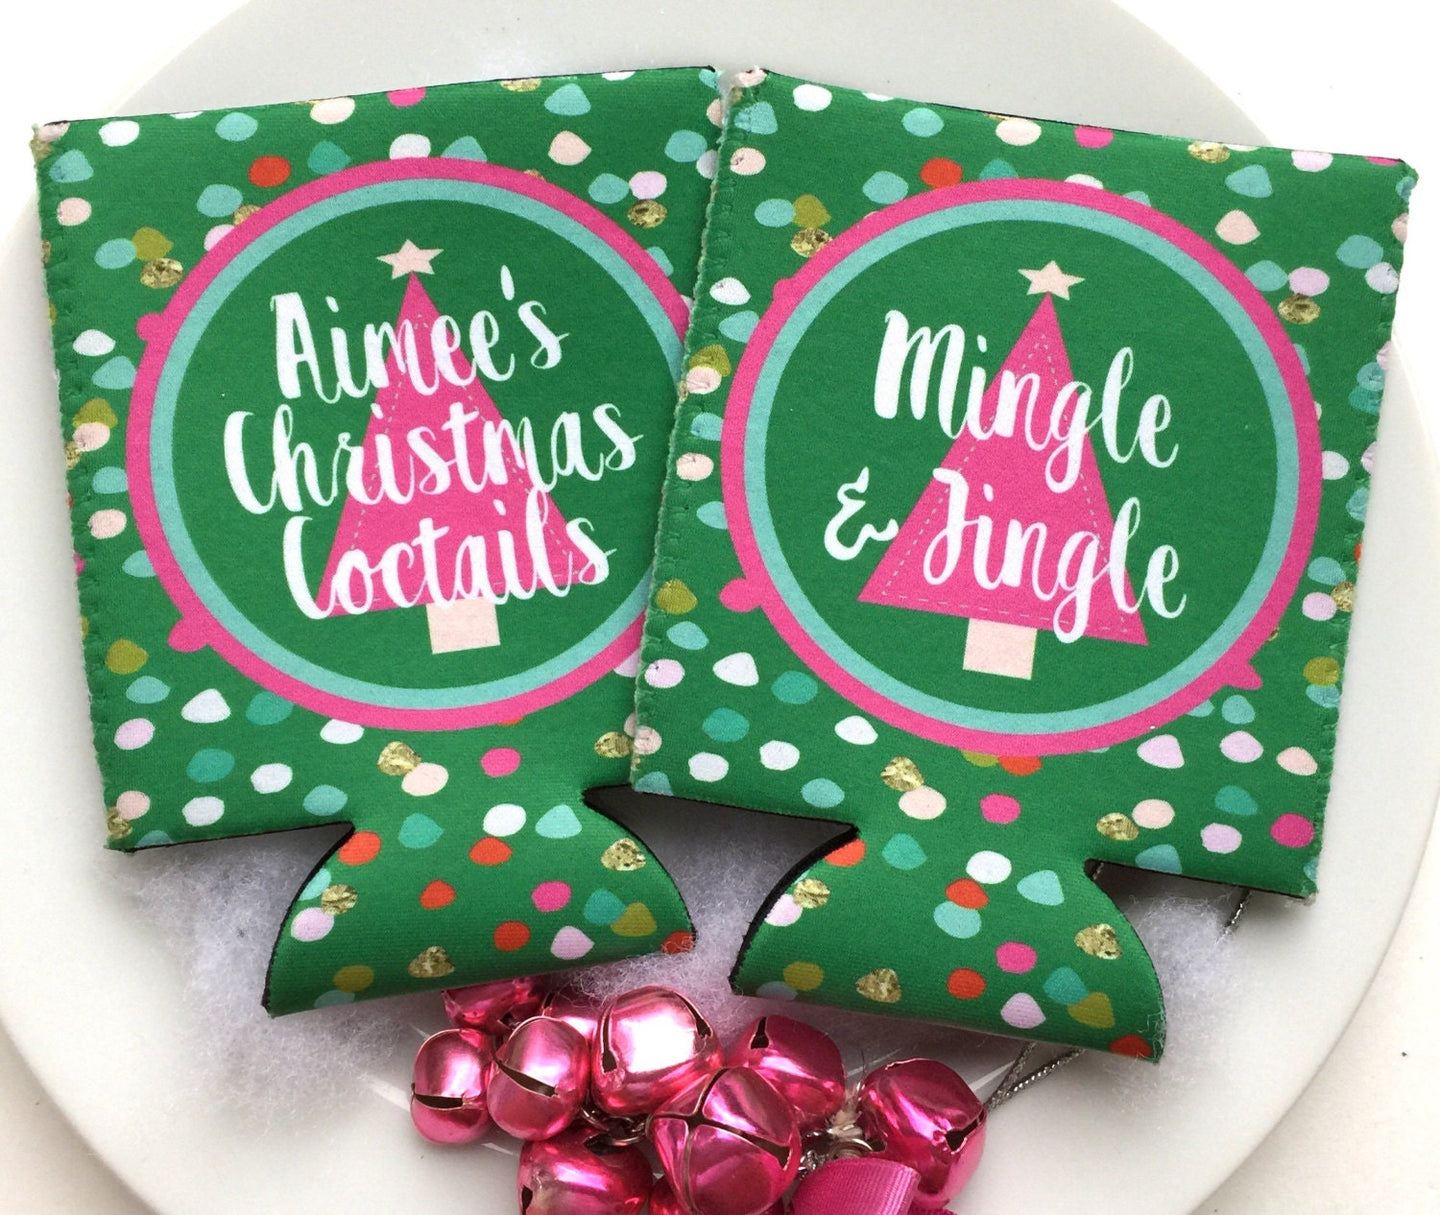 Christmas Party Huggers. Personalized Christmas Bachelorette Favors. Monogrammed Christmas Party favors. Christmas Wedding Shower Huggers!